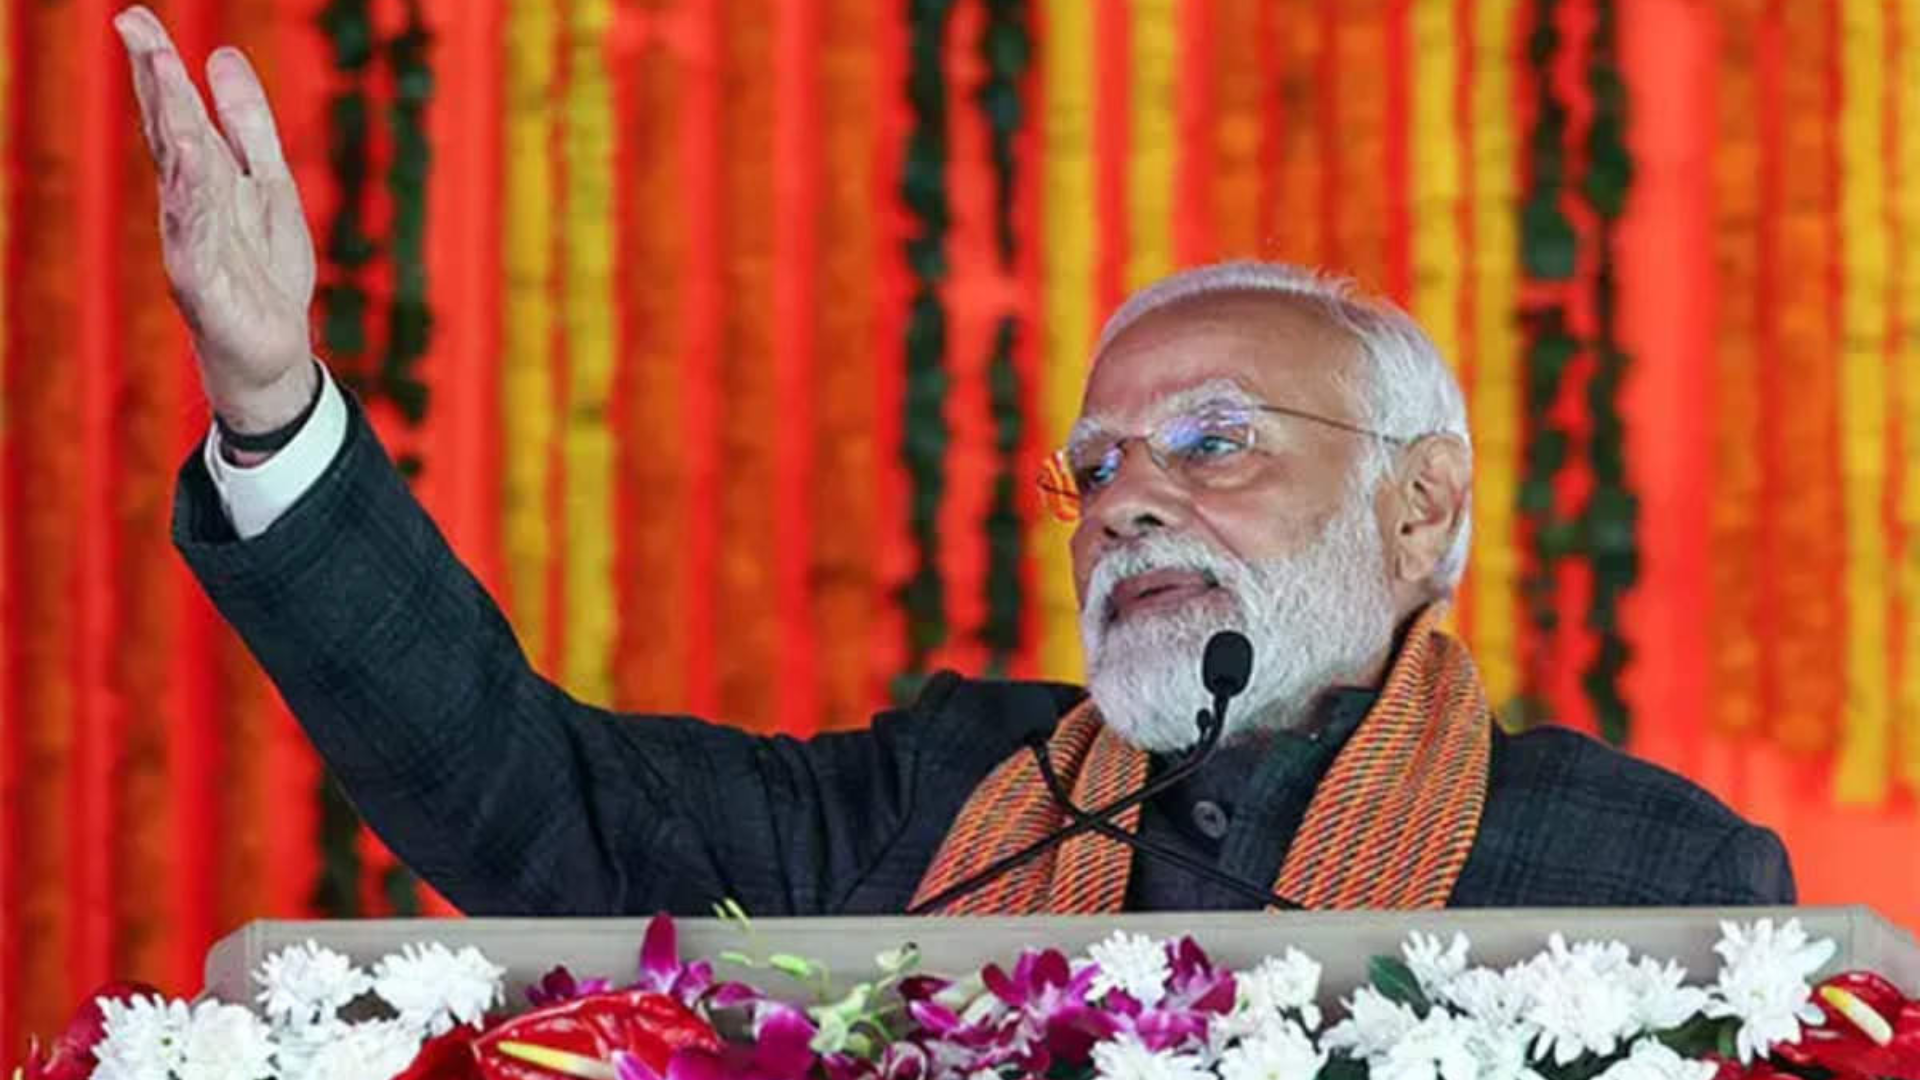 “Congress Never Cared About The Poor..” PM Modi Takes A Dig At The Opposition In Bastar Rally.